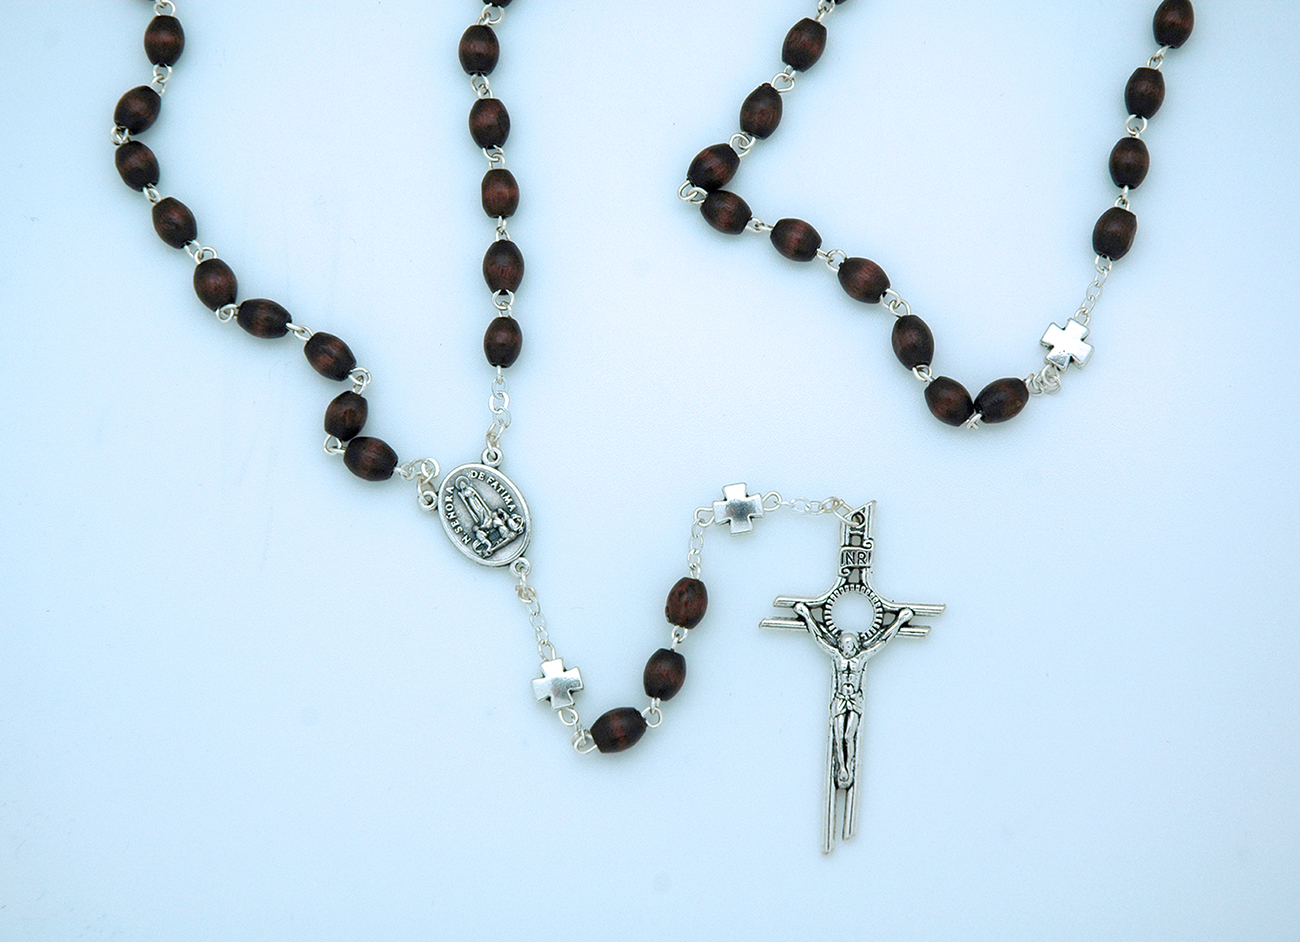 P3056 - Rosary from Fatima, Brown Oval Beads with Silver Our Father Beads